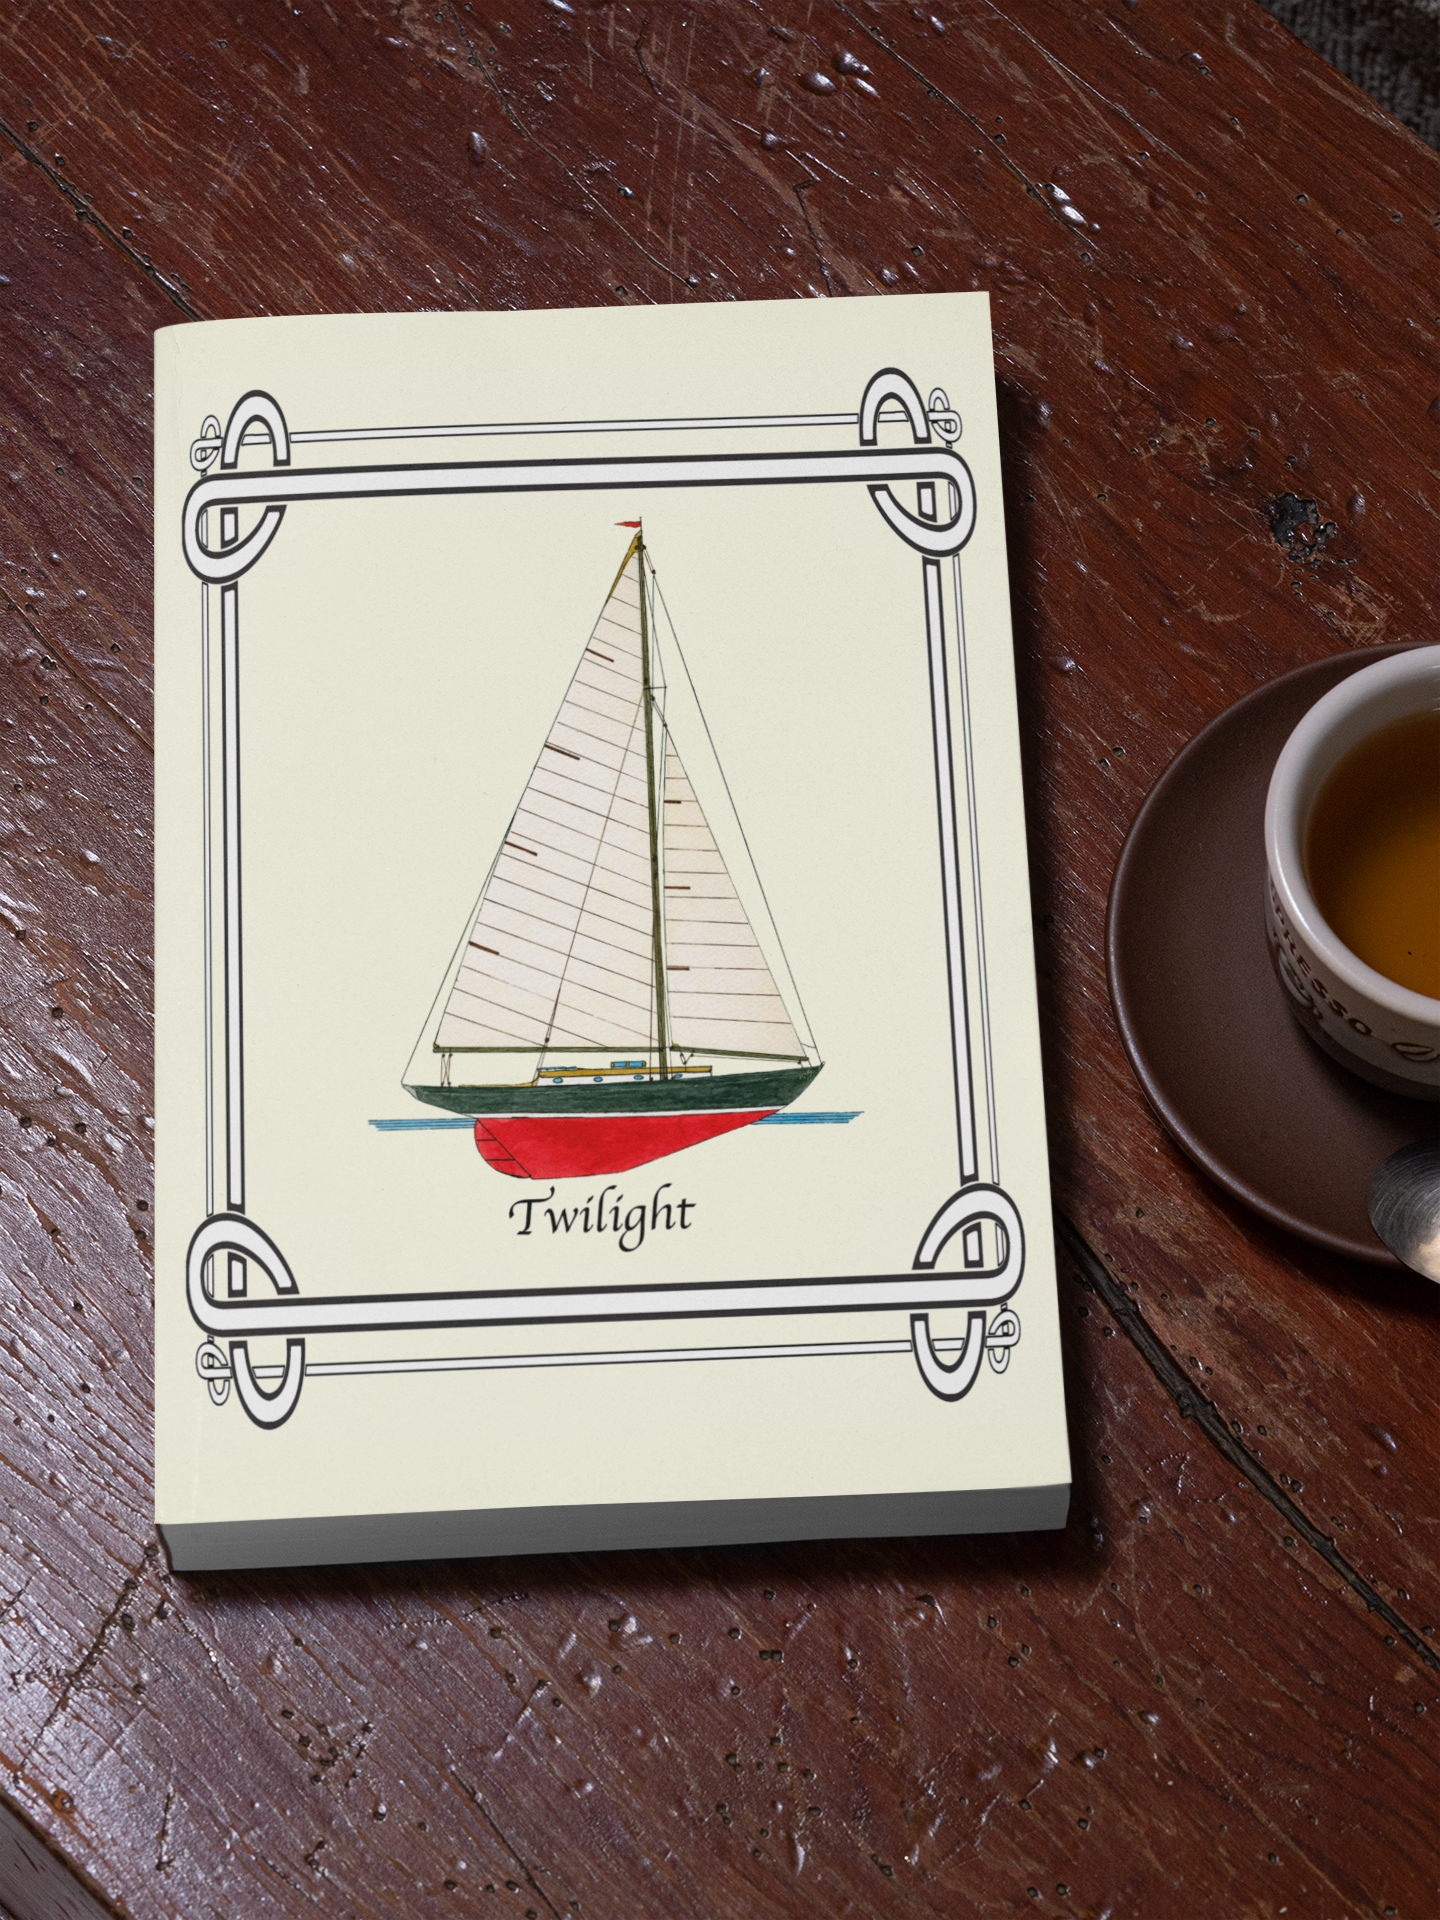 Twilight was a Cruising Racing Sloop with the pleasing profile typical of tose bujilt in the 1930's. The Journal design is a reproduction of an original watercolor by Lee M. Buchanan and has the image on the front and back of the book.     Twilight will make a thoughtful  gifts for your friends and family who love sailing and nautical gifts. 